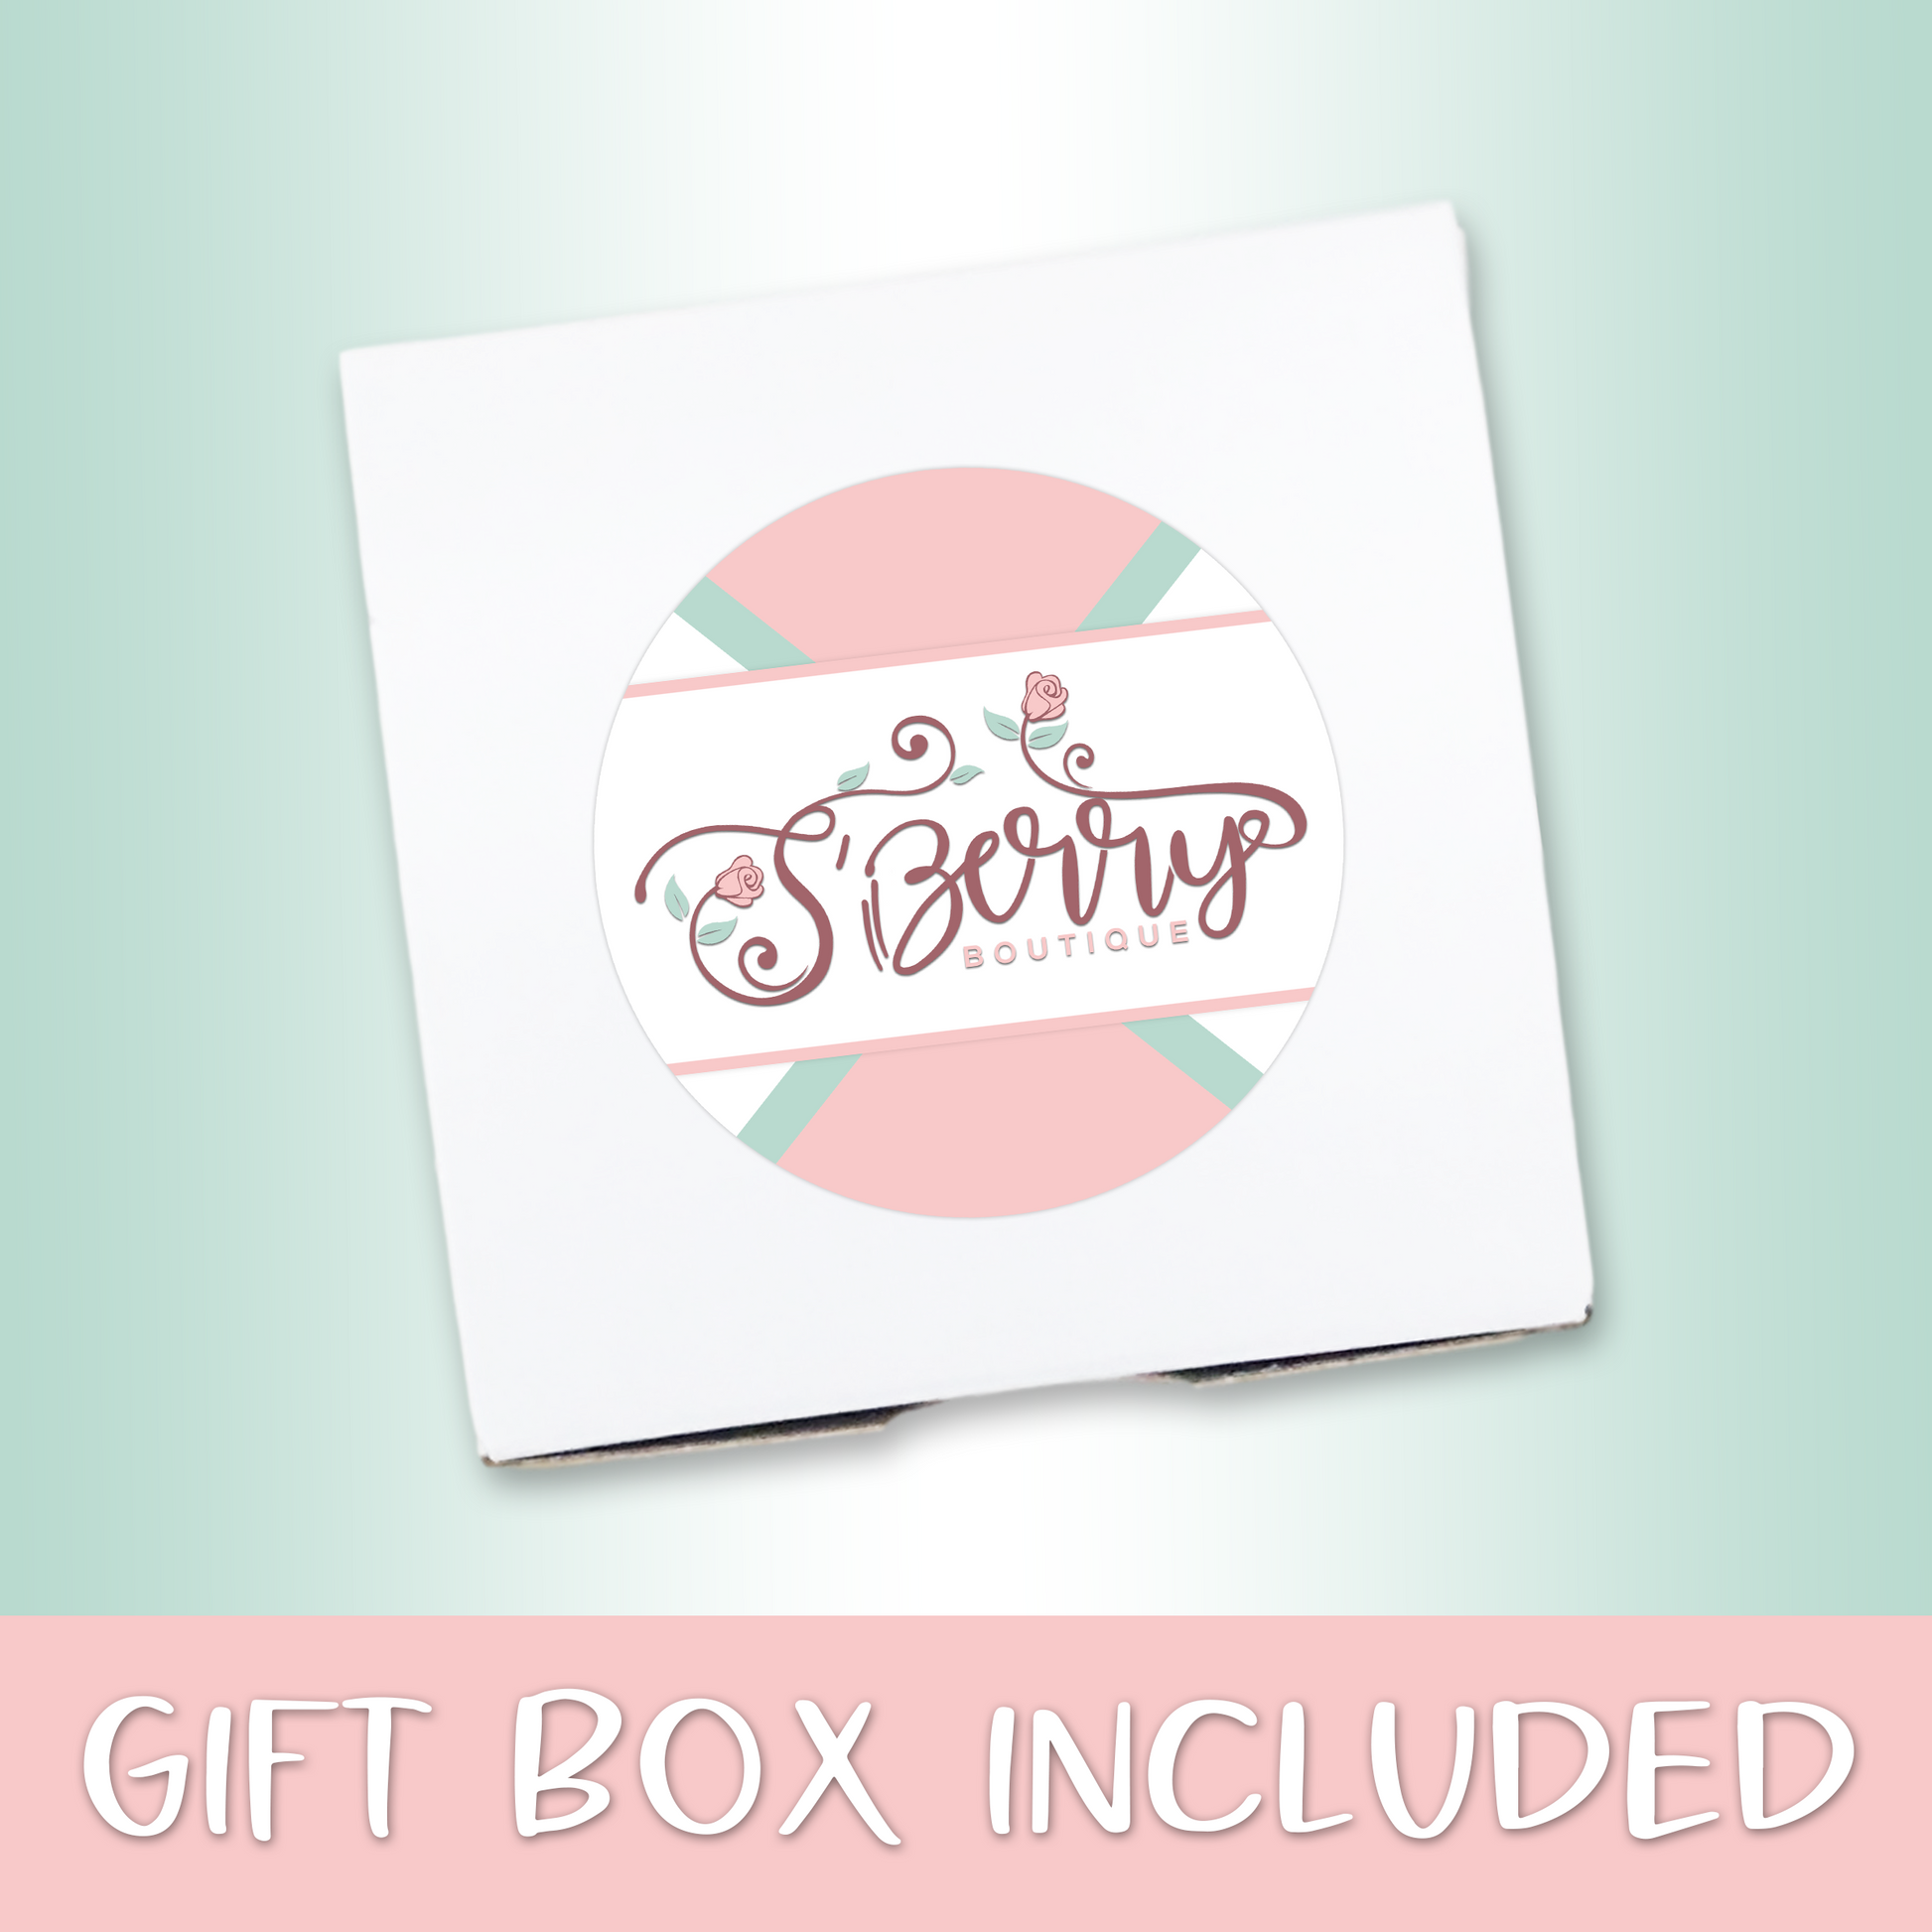 Gift Box Included - S’Berry Boutique, LLC